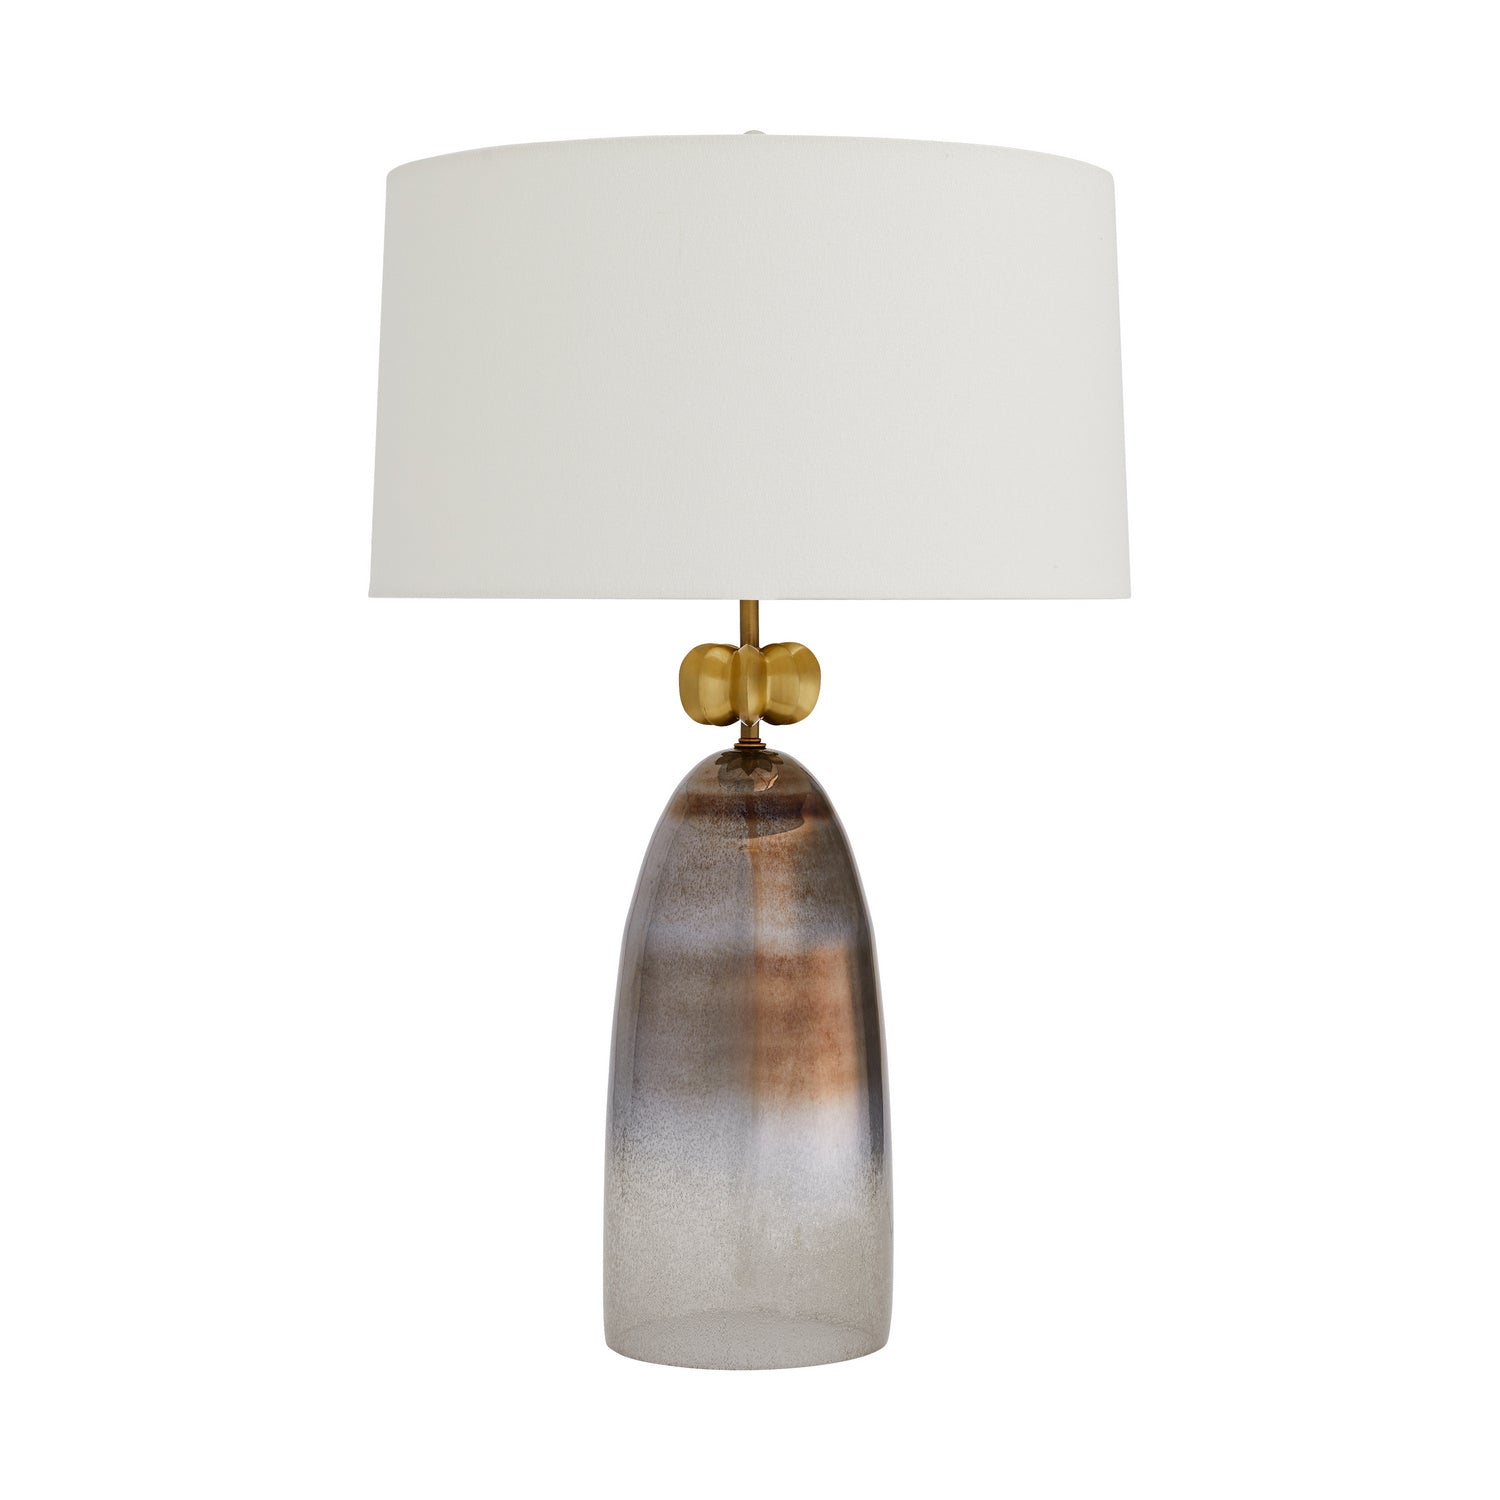 One Light Lamp from the Haley collection in Smoke Luster Ombre finish